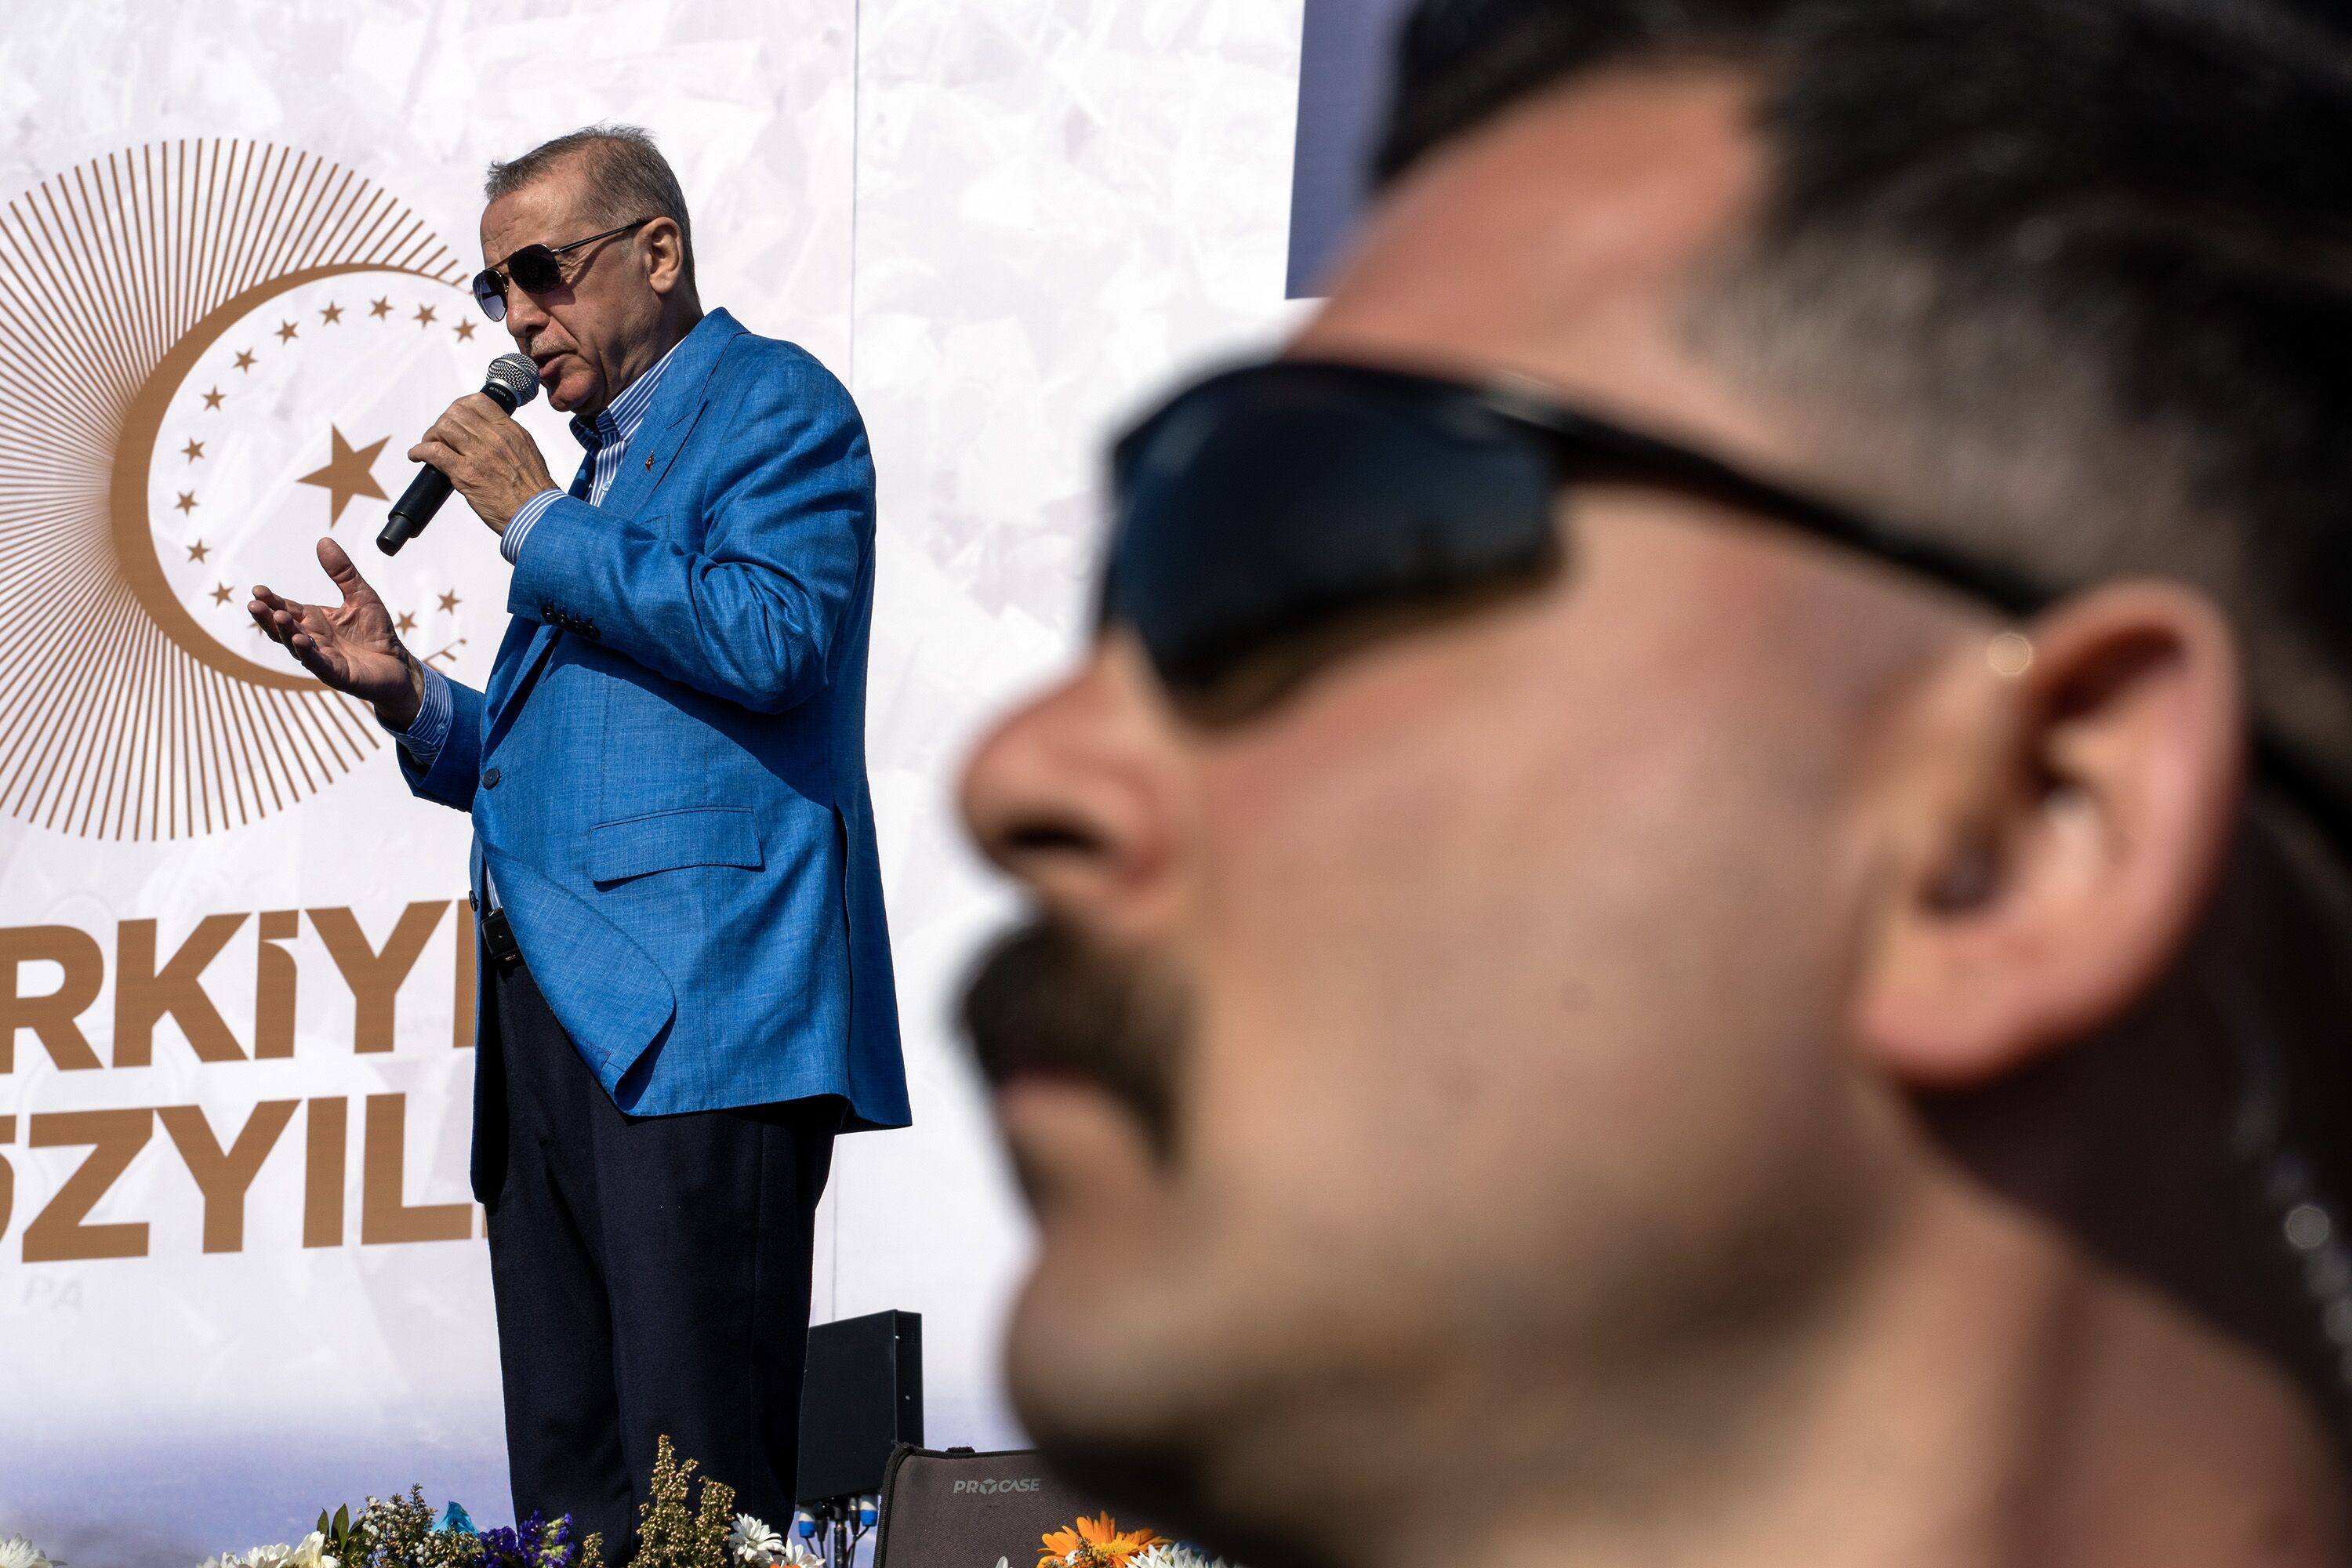 Recep Tayyip Erdogan, Turkey’s president, speaks during an election campaign rally in Istanbul. Photo: Bloomberg